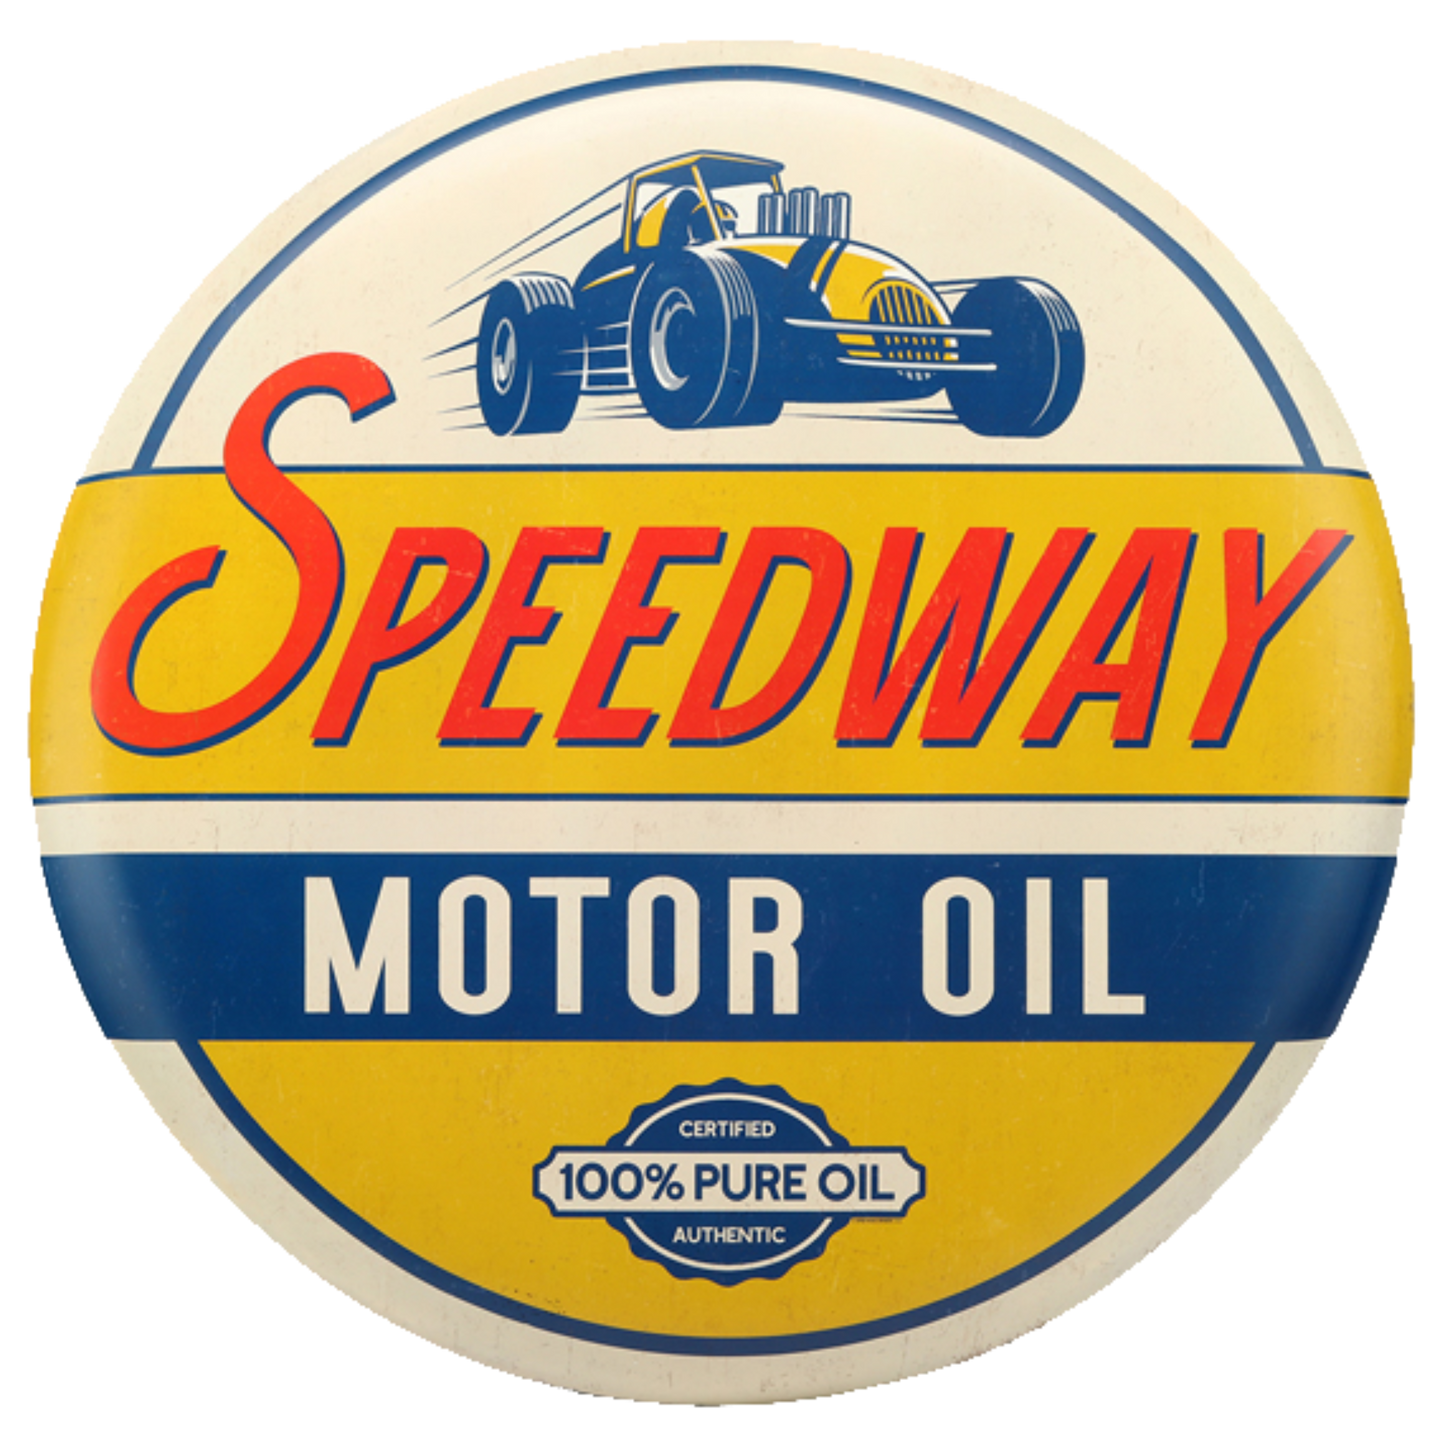 Round tin sign featuring Speedway Motor Oil design with a blue race car illustration.